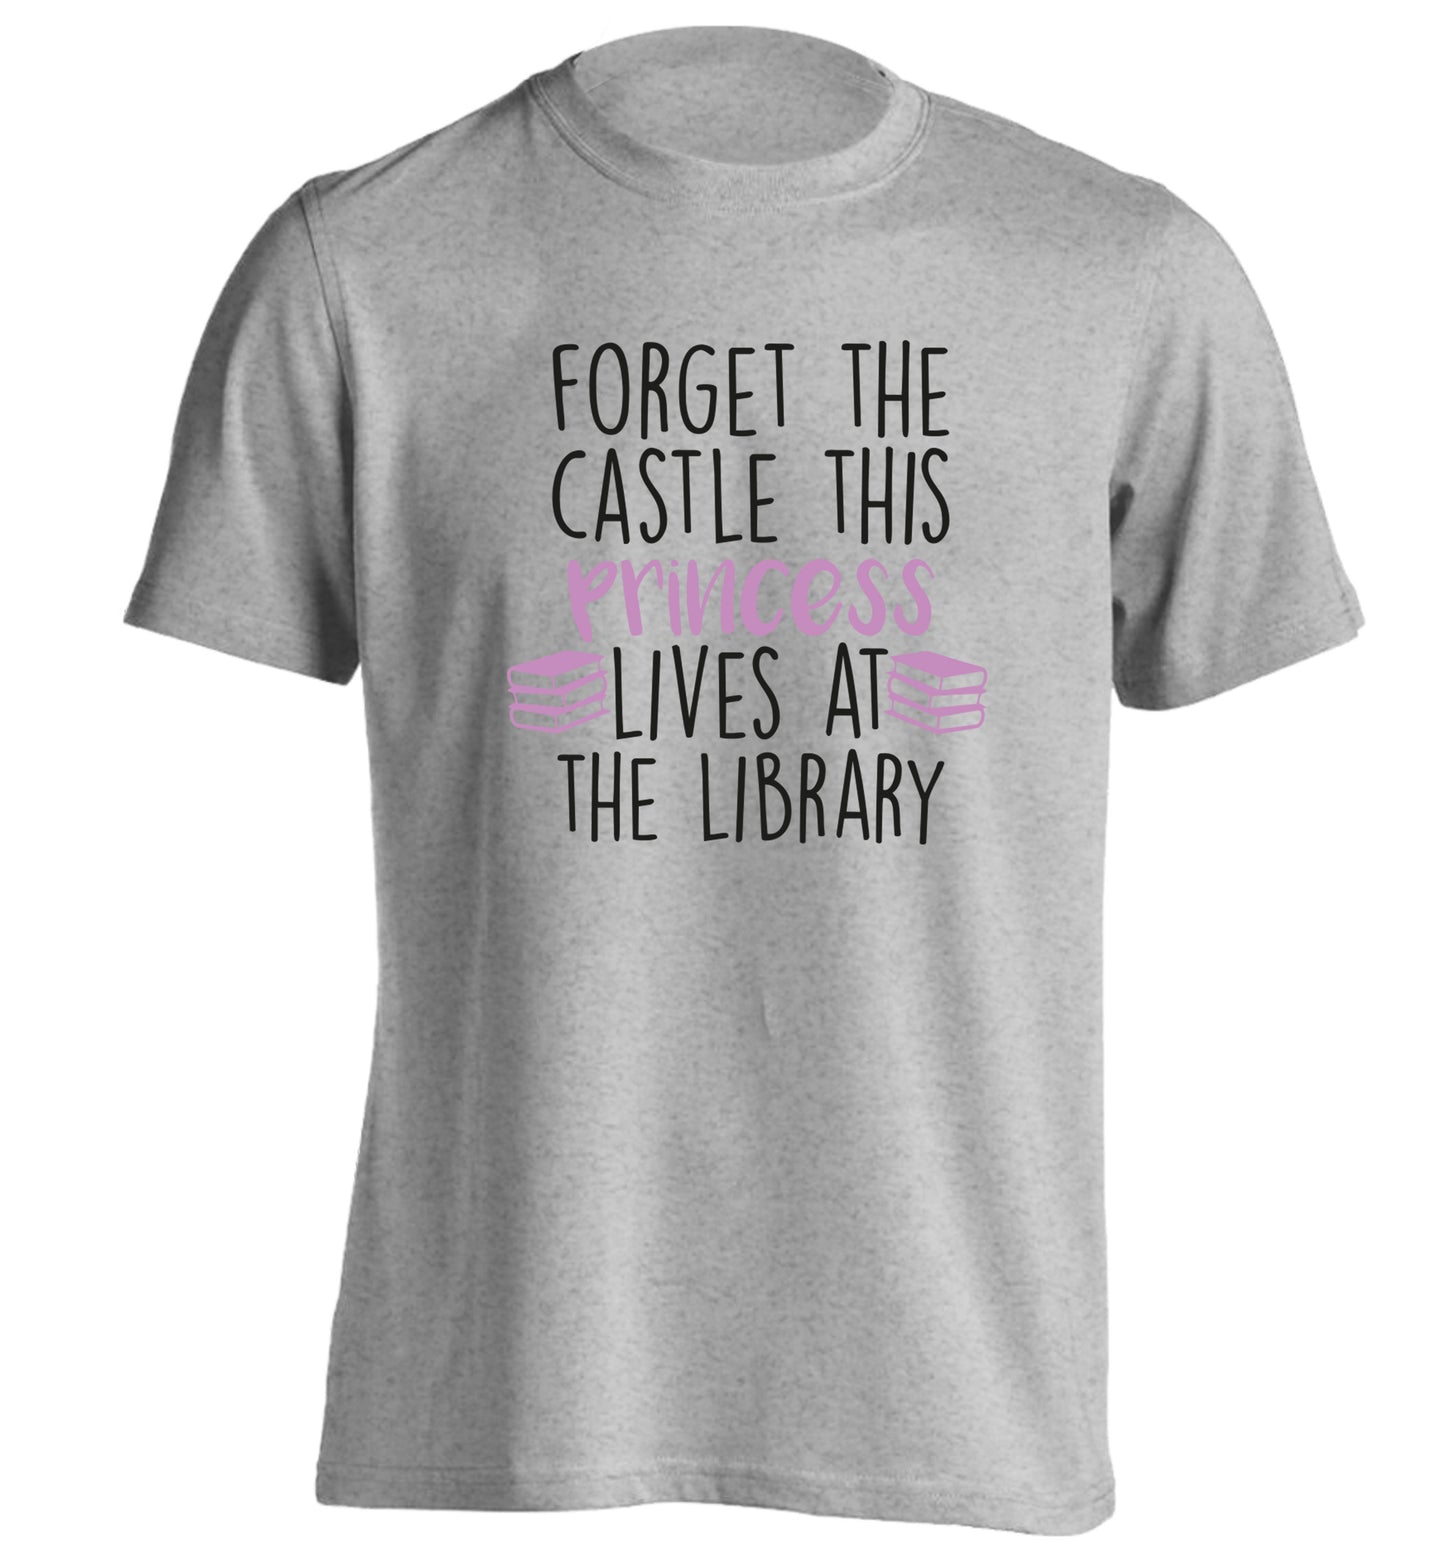 Forget the castle this princess lives at the library adults unisex grey Tshirt 2XL